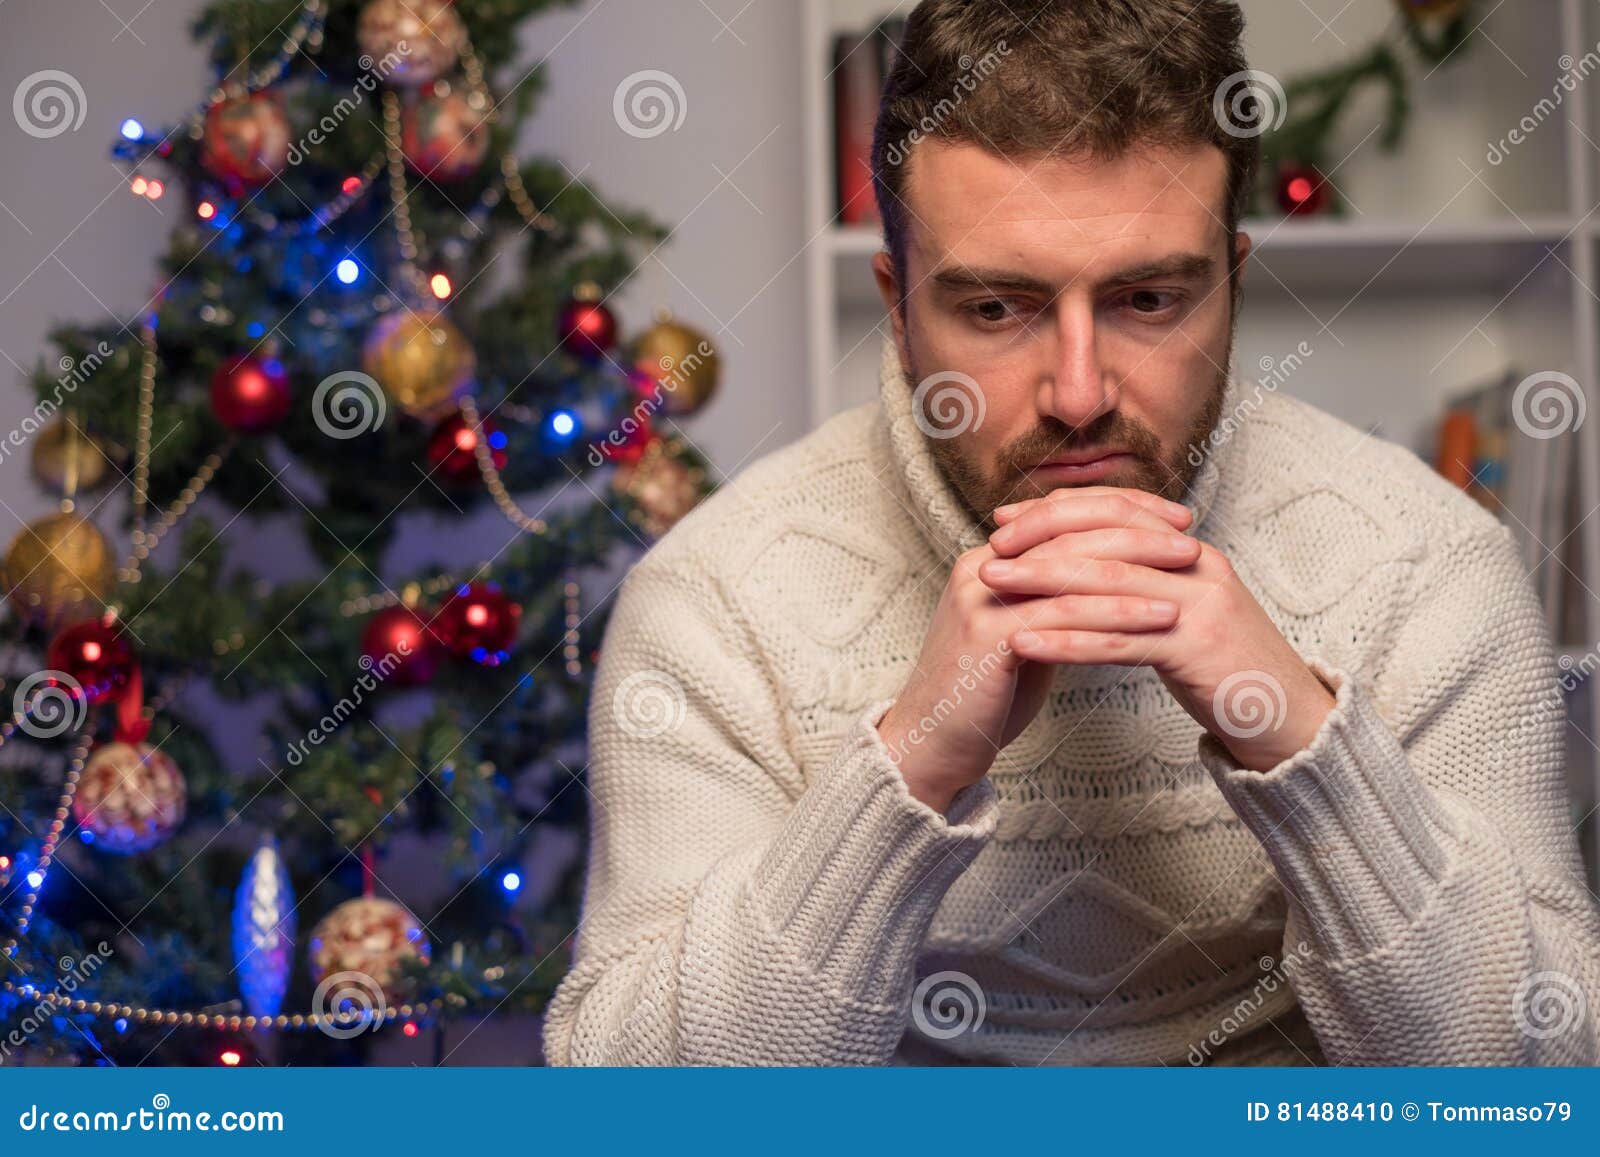 man felling depressed and lonely during the christmas time